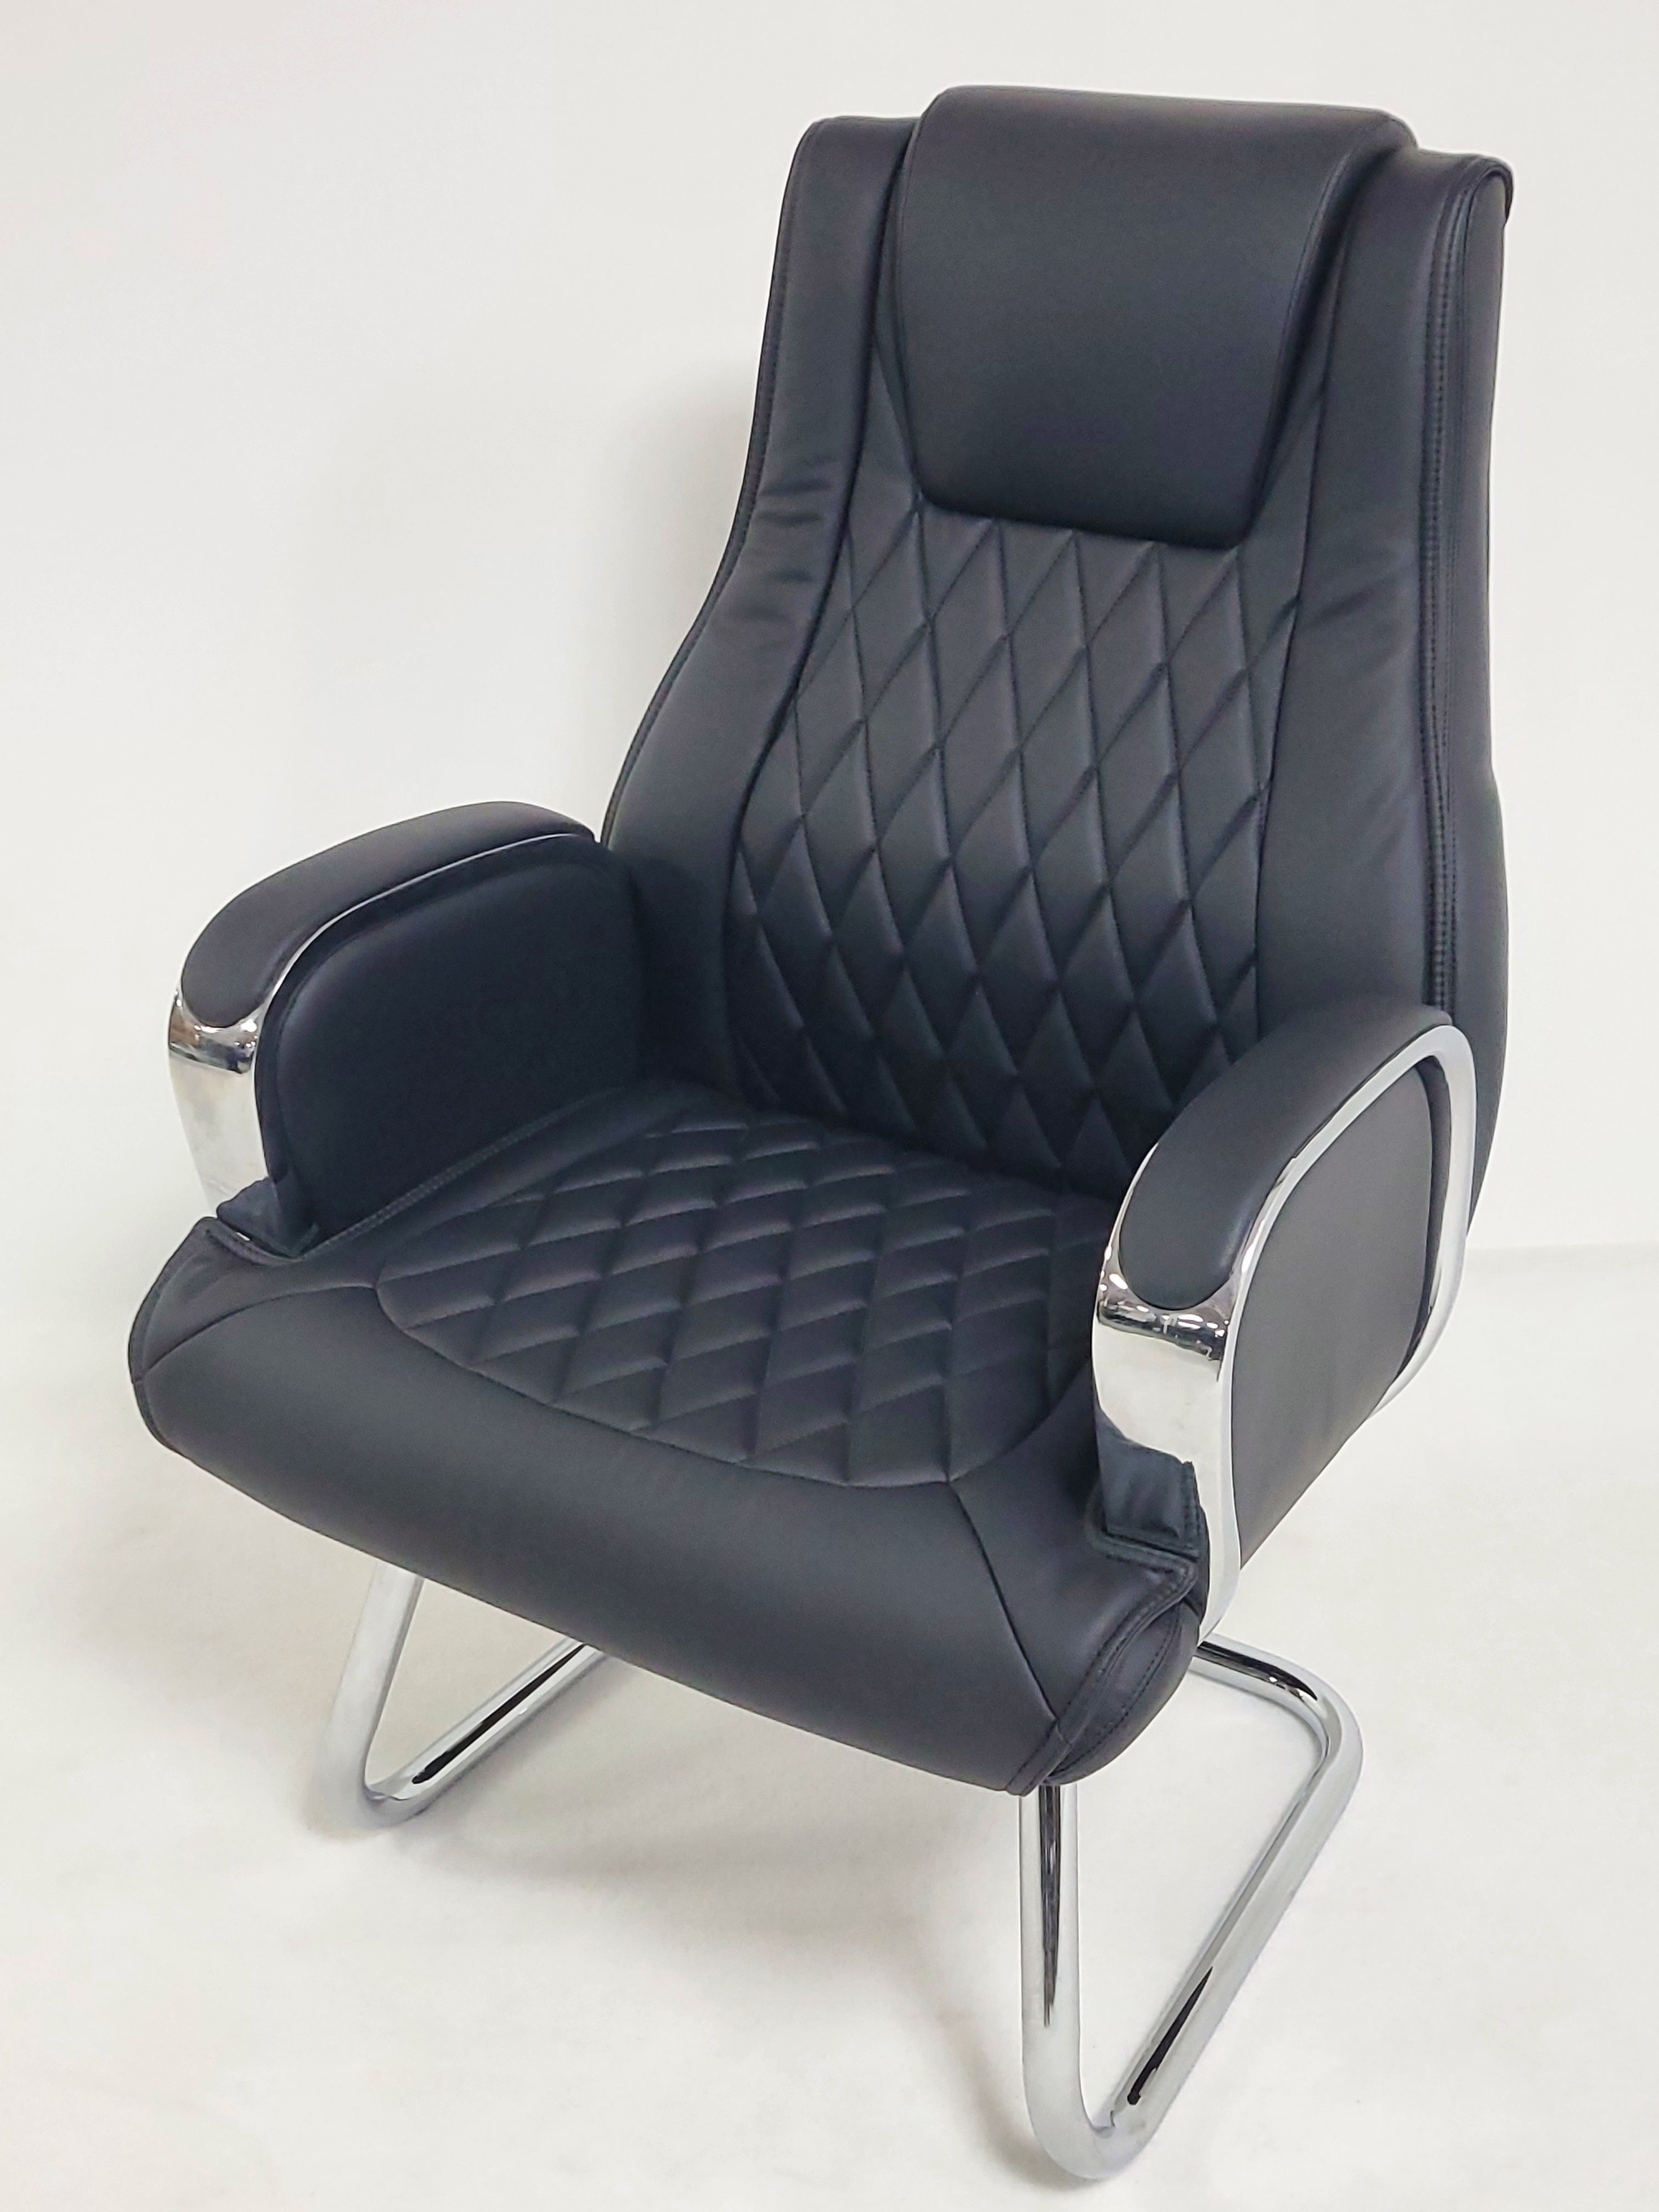 Heavy Duty Modern Black Leather Visitor Chair with Chrome Arms - CHA-1202C Near Me